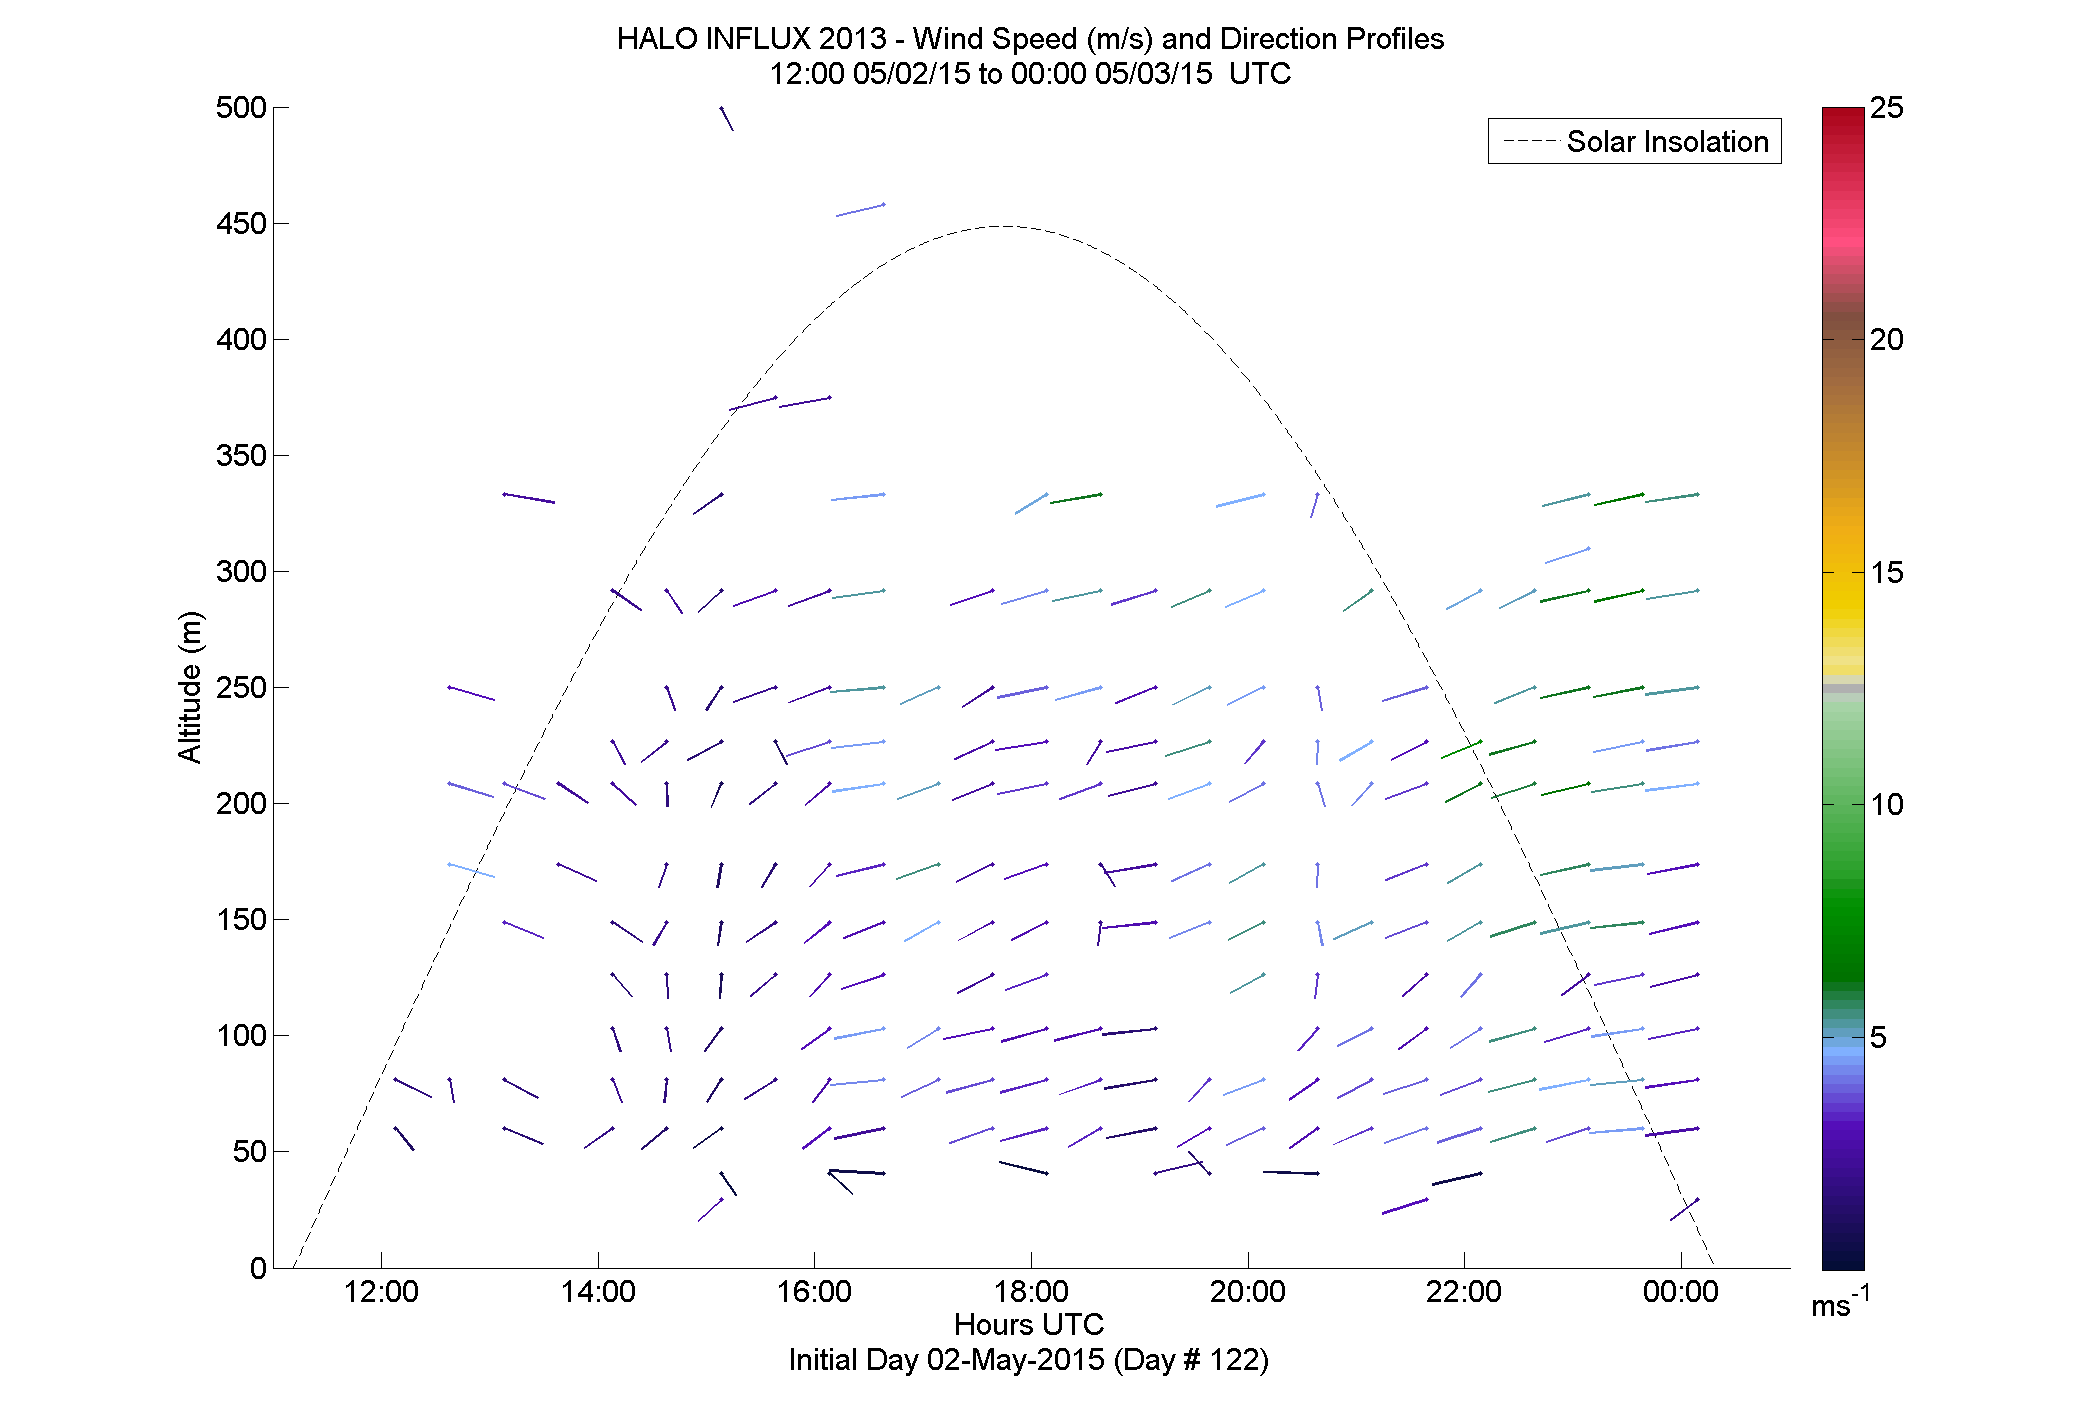 HALO speed and direction profile - May 2 pm